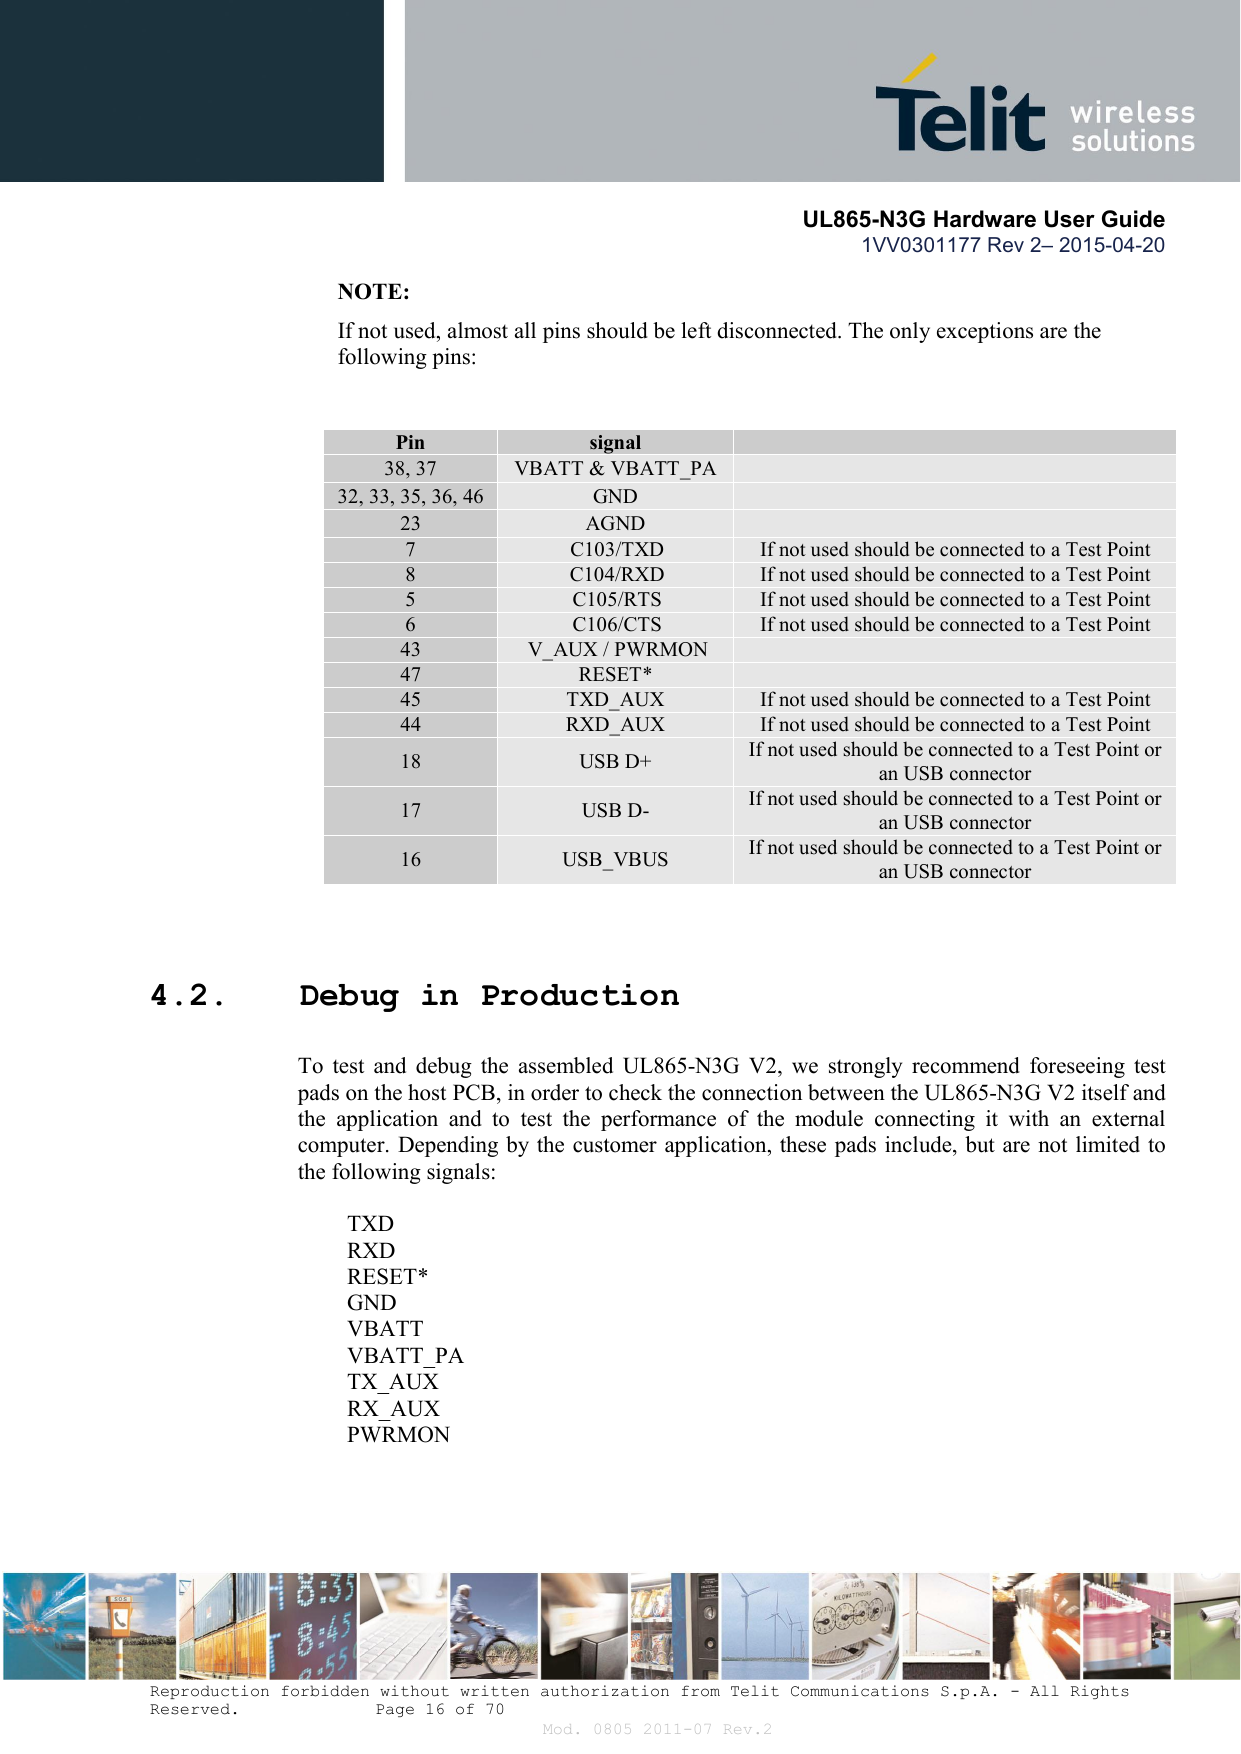       UL865-N3G Hardware User Guide 1VV0301177 Rev 2– 2015-04-20  Reproduction forbidden without written authorization from Telit Communications S.p.A. - All Rights Reserved.    Page 16 of 70 Mod. 0805 2011-07 Rev.2 NOTE: If not used, almost all pins should be left disconnected. The only exceptions are the following pins:                    4.2. Debug in Production To  test  and  debug  the  assembled  UL865-N3G  V2,  we  strongly  recommend  foreseeing  test pads on the host PCB, in order to check the connection between the UL865-N3G V2 itself and the  application  and  to  test  the  performance  of  the  module  connecting  it  with  an  external computer. Depending by the customer application, these pads include, but are not limited to the following signals:   TXD  RXD  RESET*  GND  VBATT  VBATT_PA  TX_AUX  RX_AUX  PWRMON Pin  signal   38, 37  VBATT &amp; VBATT_PA   32, 33, 35, 36, 46  GND   23  AGND   7  C103/TXD  If not used should be connected to a Test Point 8  C104/RXD  If not used should be connected to a Test Point 5  C105/RTS  If not used should be connected to a Test Point 6  C106/CTS  If not used should be connected to a Test Point 43  V_AUX / PWRMON   47  RESET*   45  TXD_AUX  If not used should be connected to a Test Point 44  RXD_AUX  If not used should be connected to a Test Point 18  USB D+  If not used should be connected to a Test Point or an USB connector 17  USB D-  If not used should be connected to a Test Point or an USB connector 16  USB_VBUS  If not used should be connected to a Test Point or an USB connector 